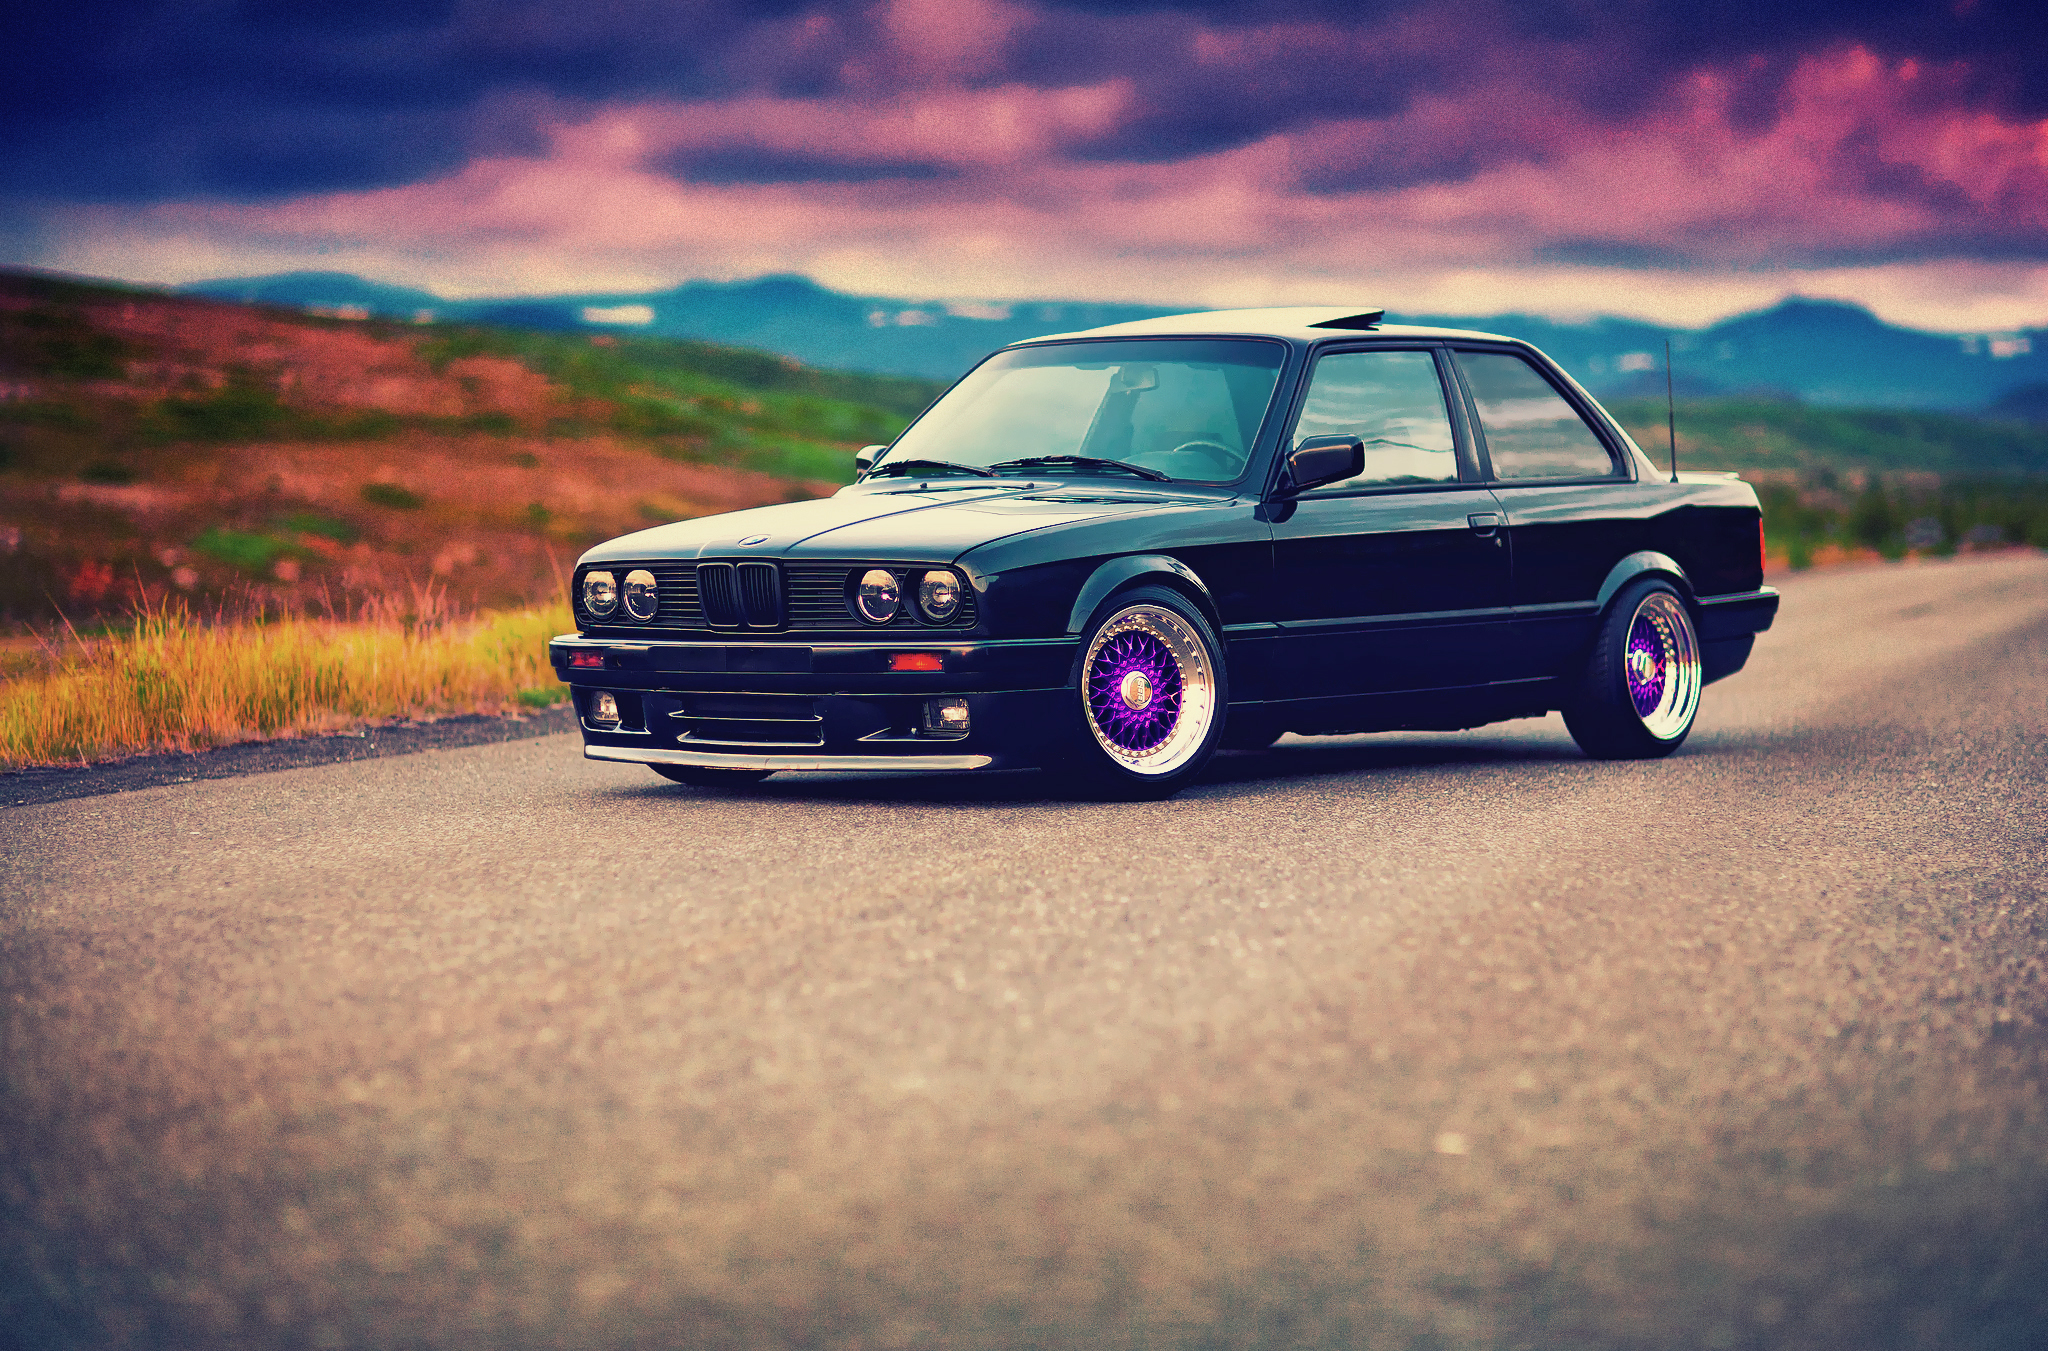 Wallpaper Bmw E30 325i Front Car Pictures And Photos